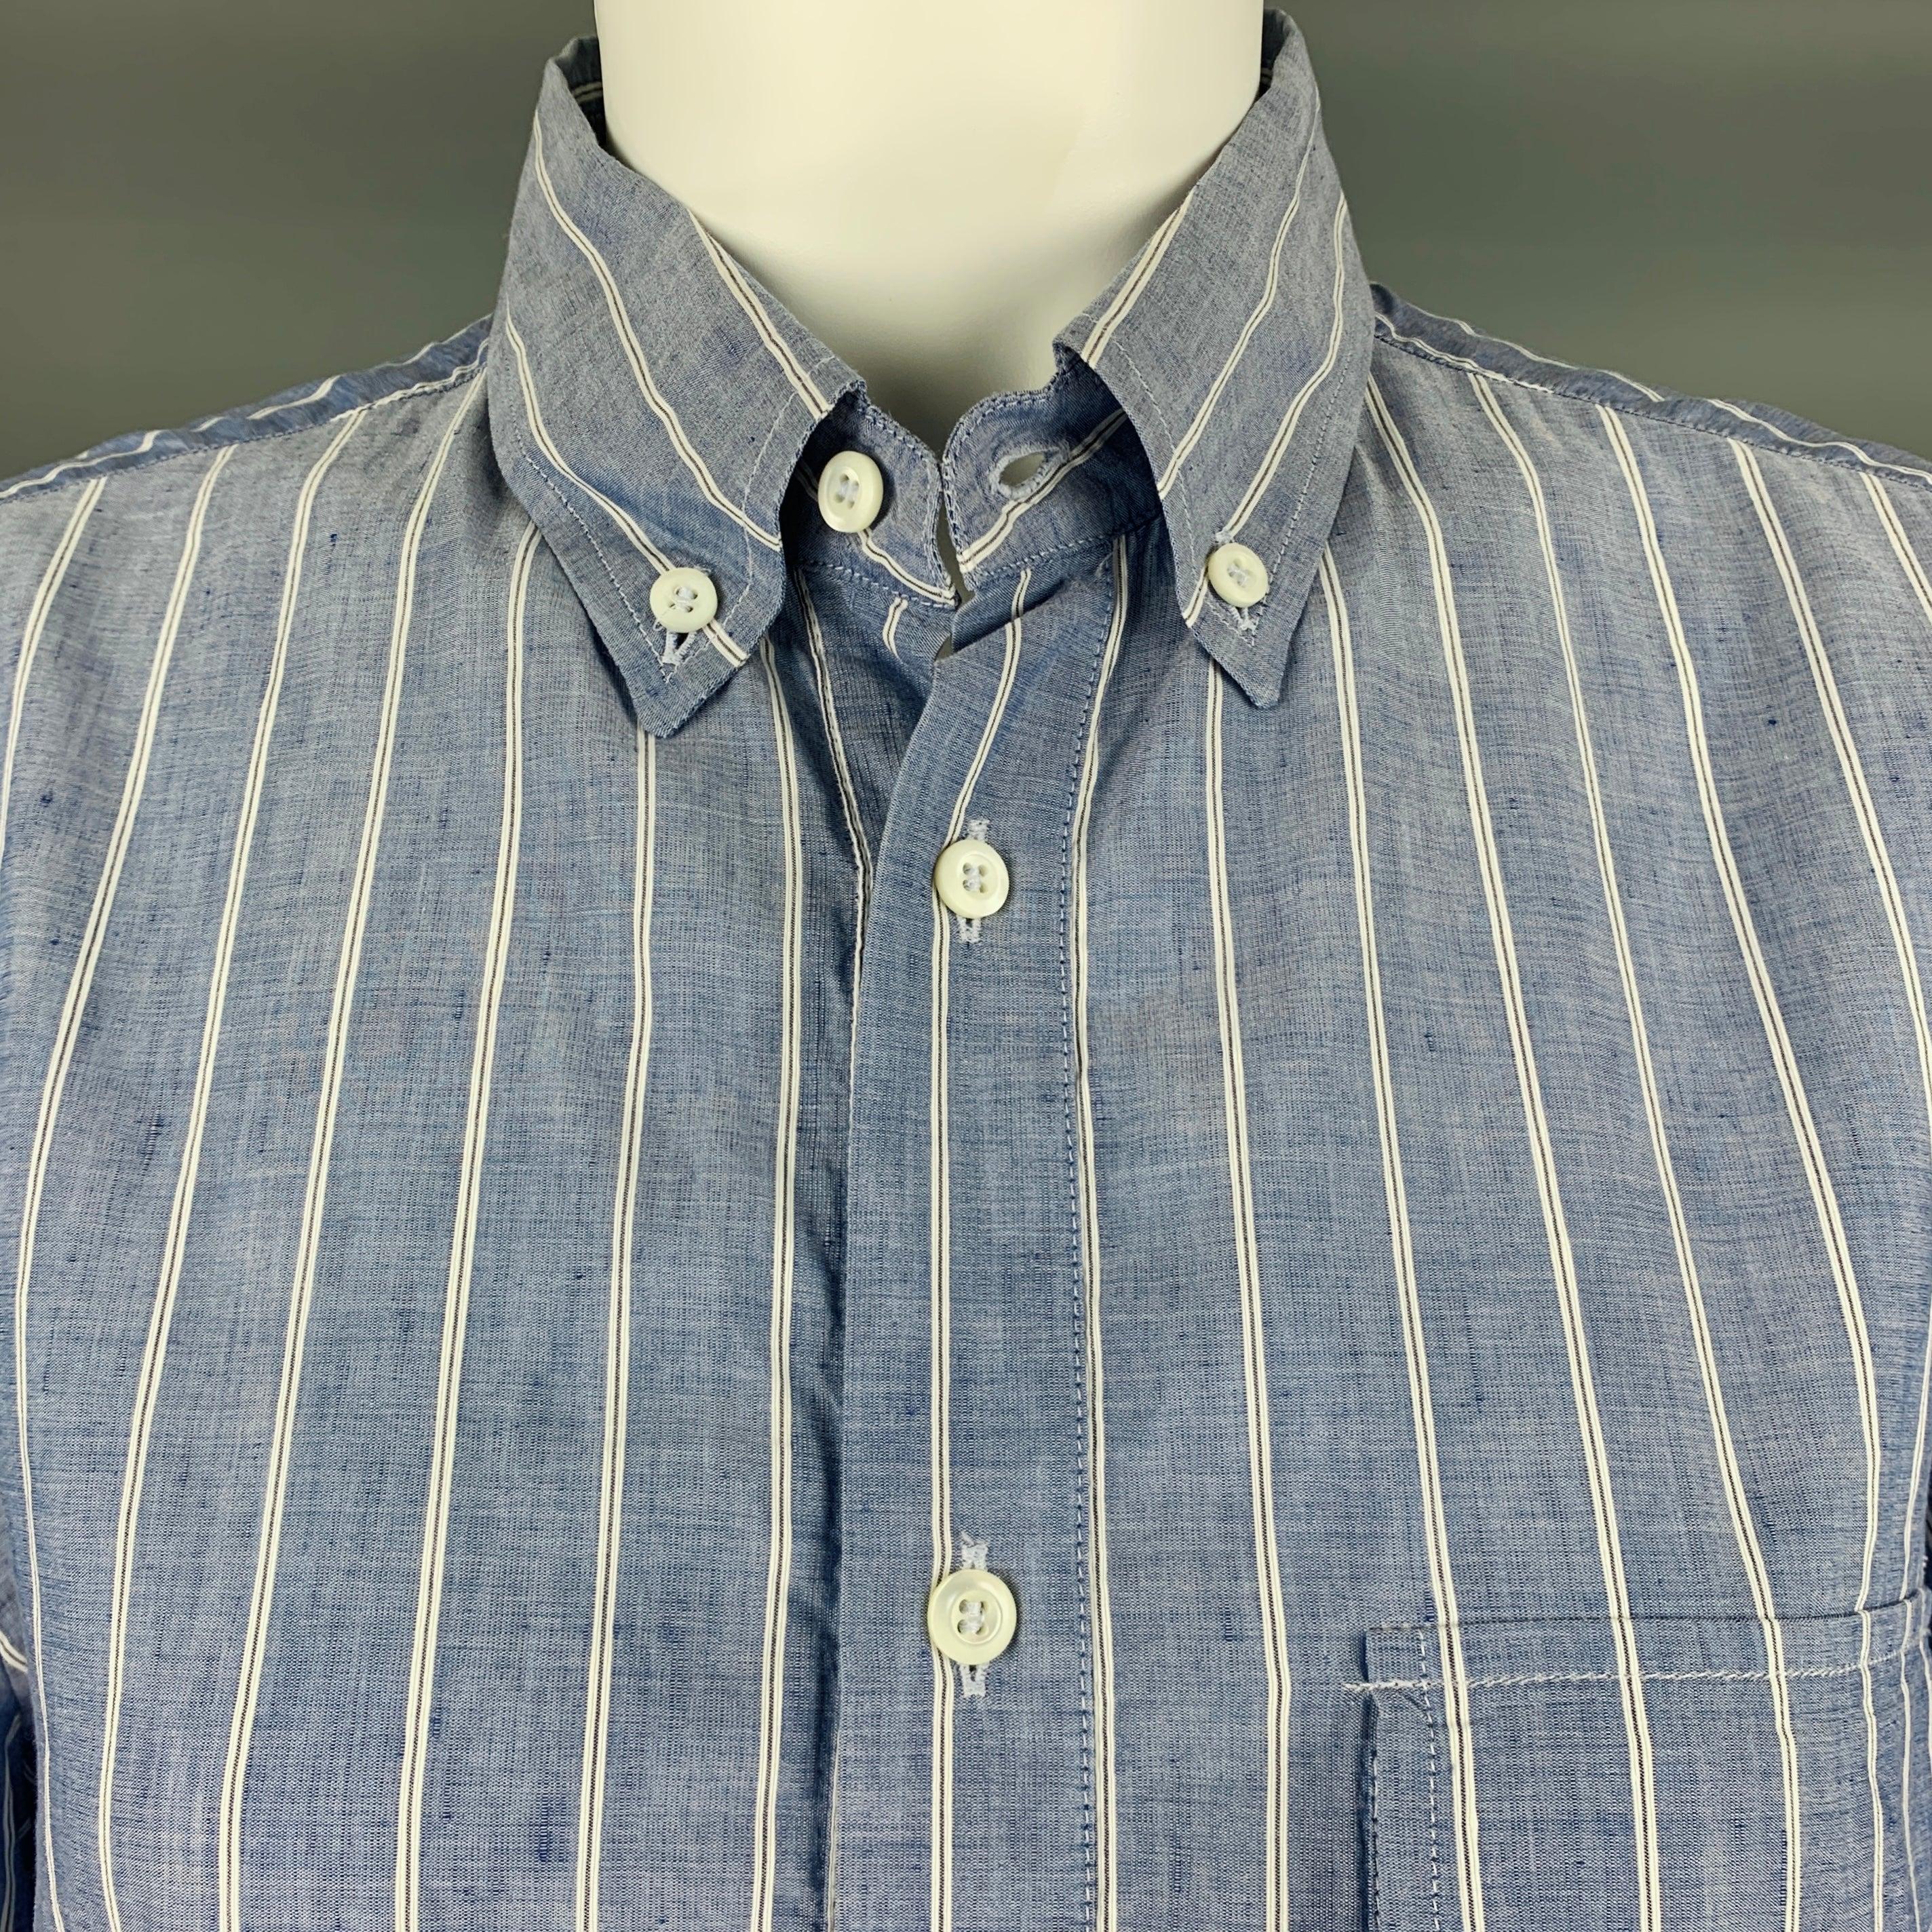 BRUNELLO CUCINELLI long sleeve shirt
in a
blue and white woven fabric featuring stripe pattern, button down collar, and long placket button closure. Made in Italy. Note: this item has been altered, please check measurements. Photos were taken on a